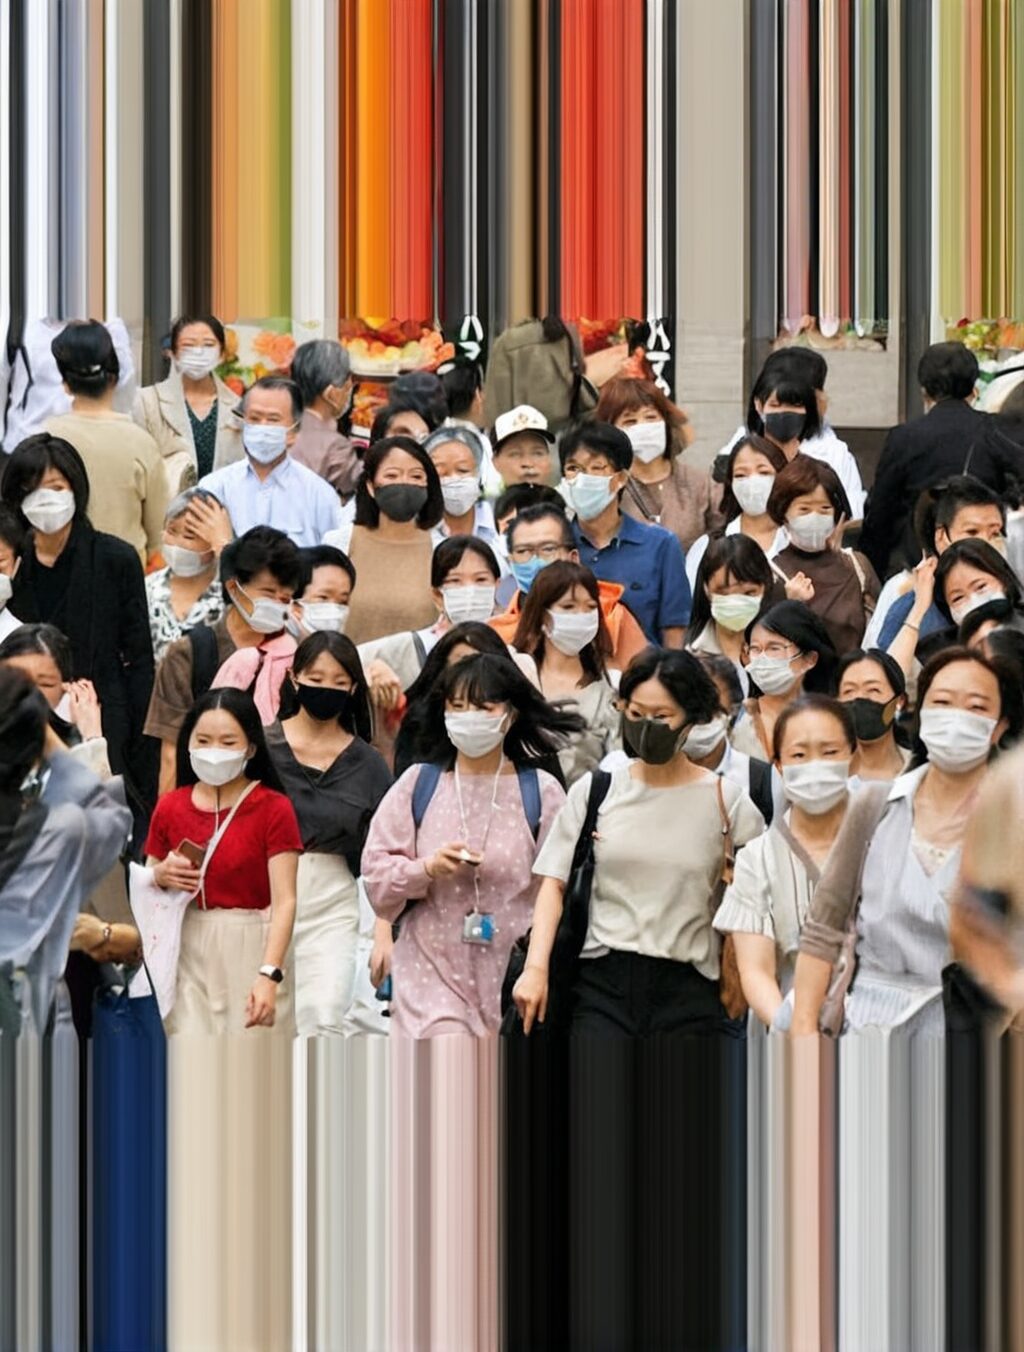 why do people wear face masks in japan